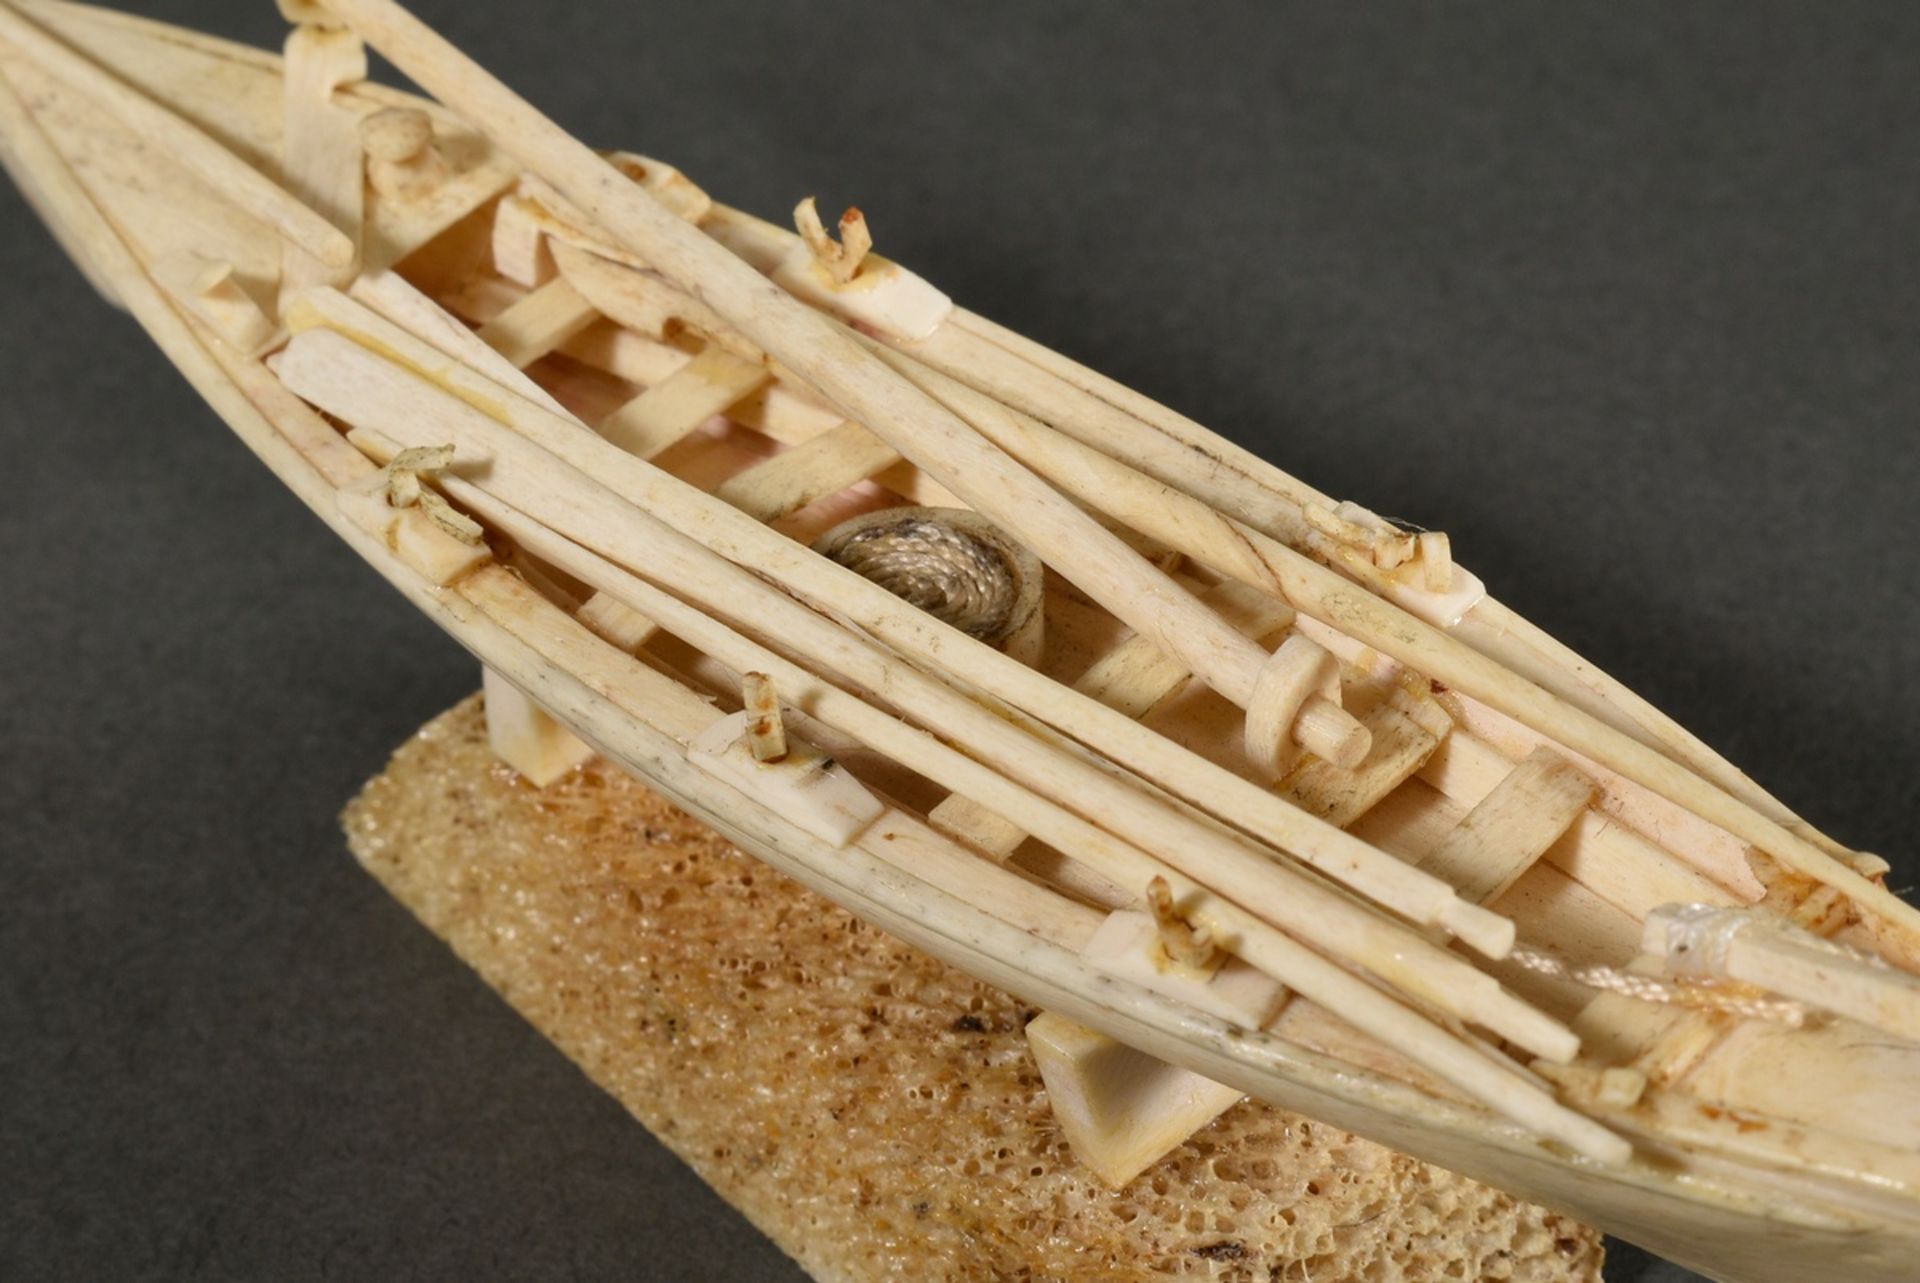 Scrimshaw "Whaling Boat", carved whale tooth, bone and thread, on base, parts partly glued, 19th c. - Image 5 of 6